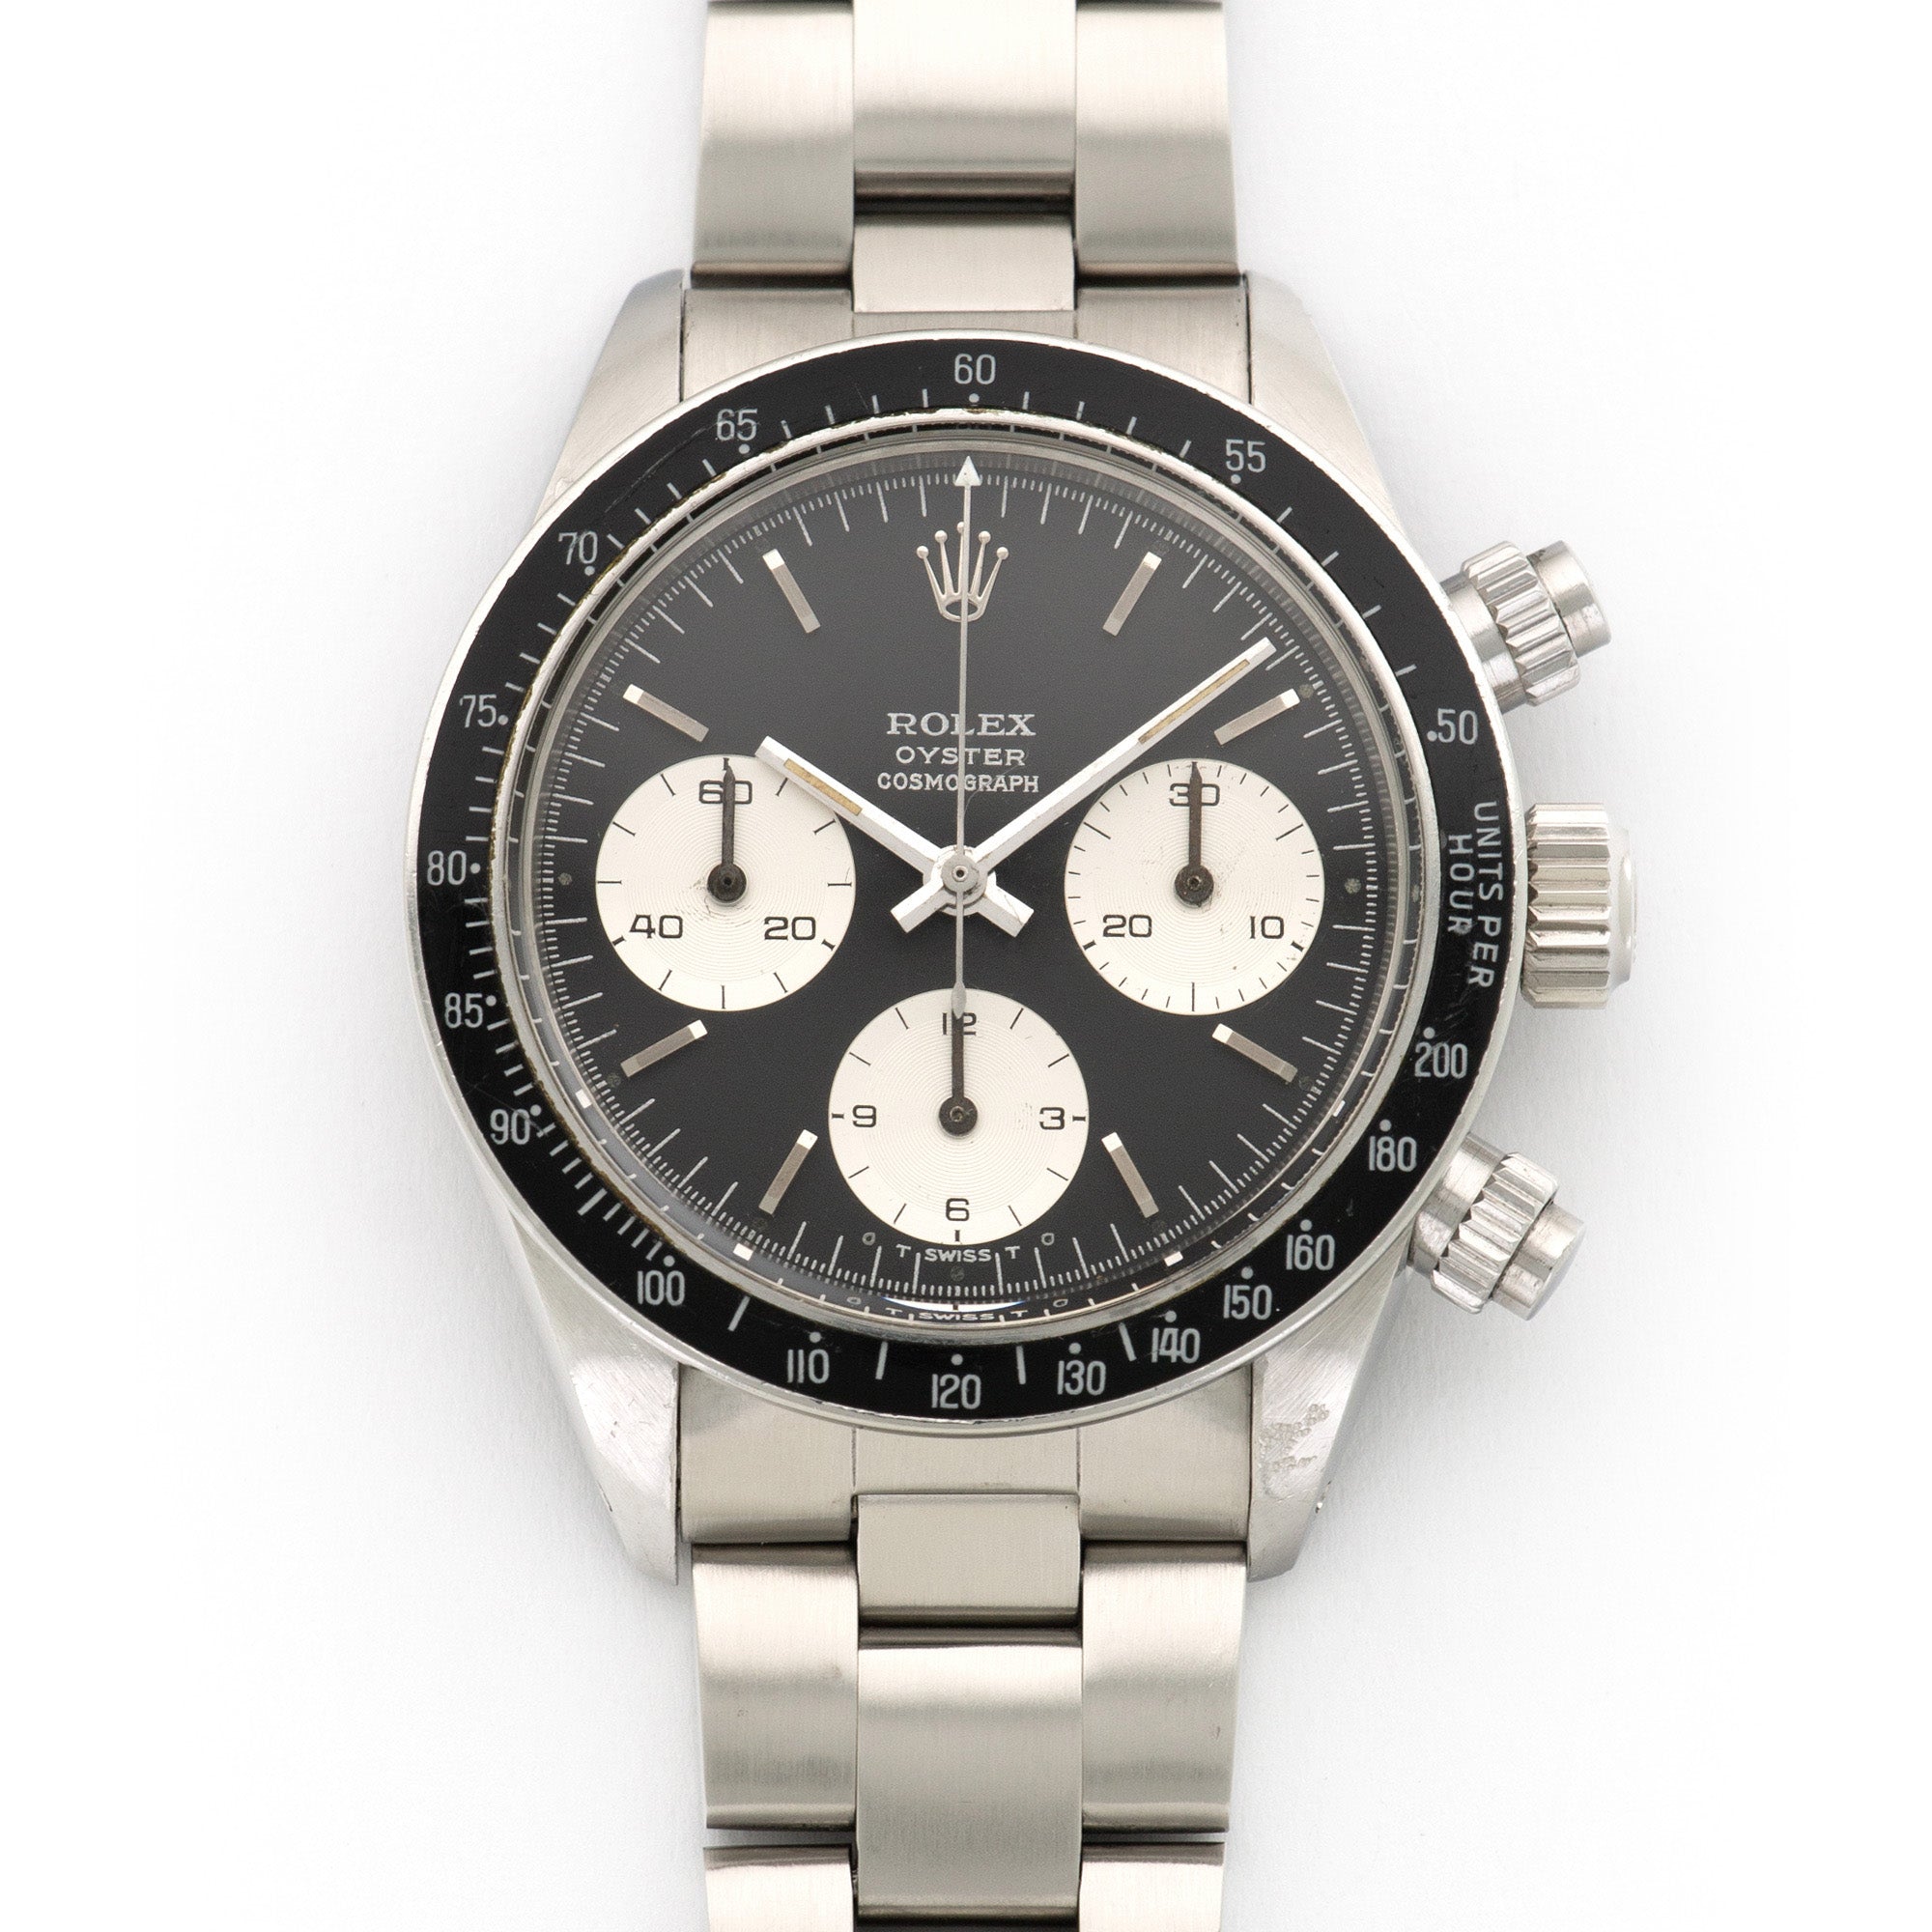 Rolex - Rolex Cosmograph Daytona Watch Ref. 6263 with Military History, Sigma Dial and Original Warranty and Hangtag - The Keystone Watches